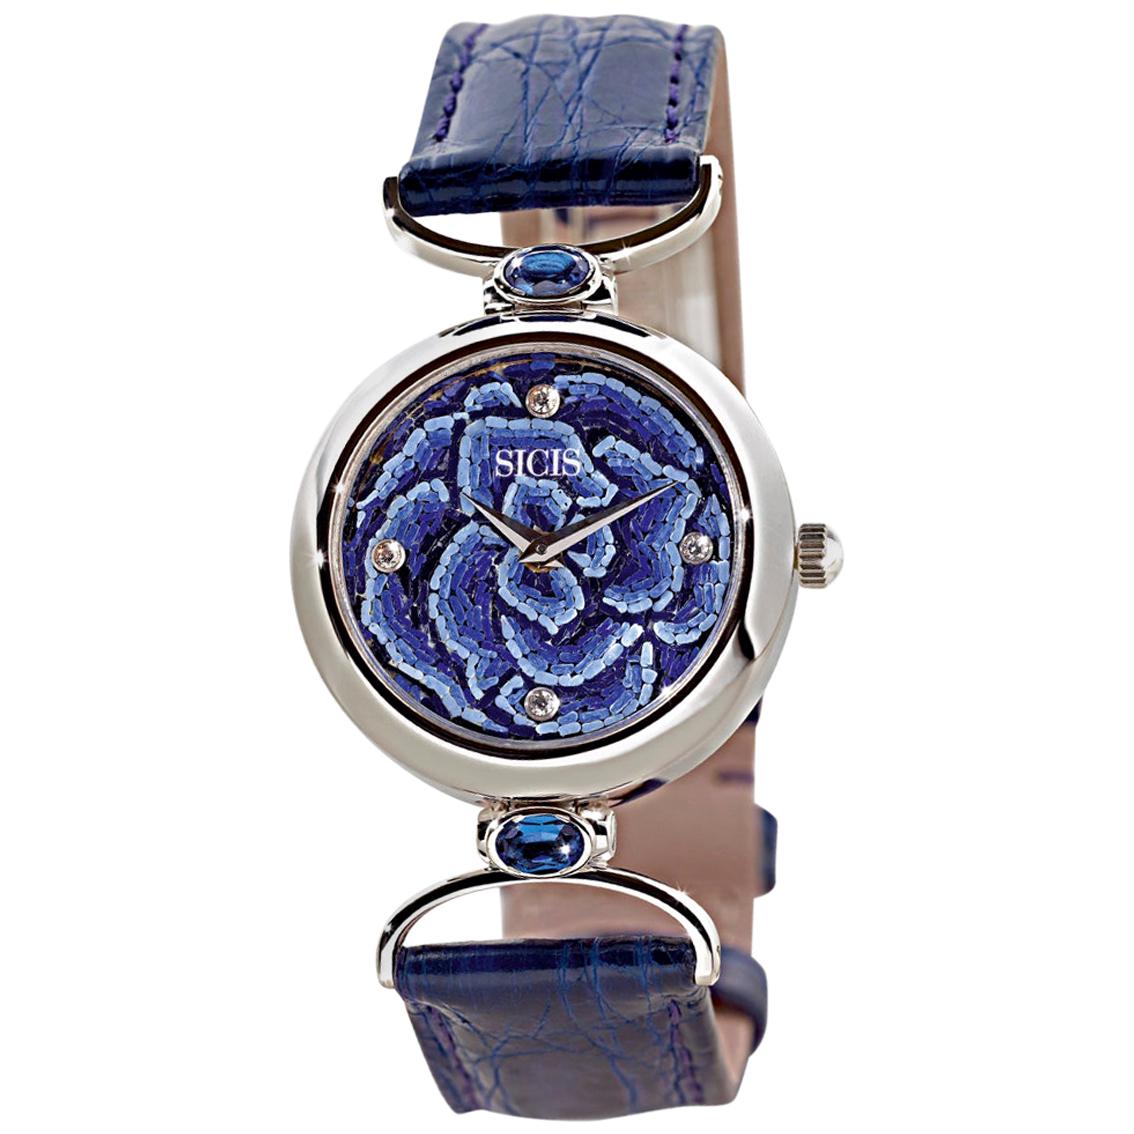 Wristwatch White Gold Mother of Pearl Alligator Strap Designed by Roger ...